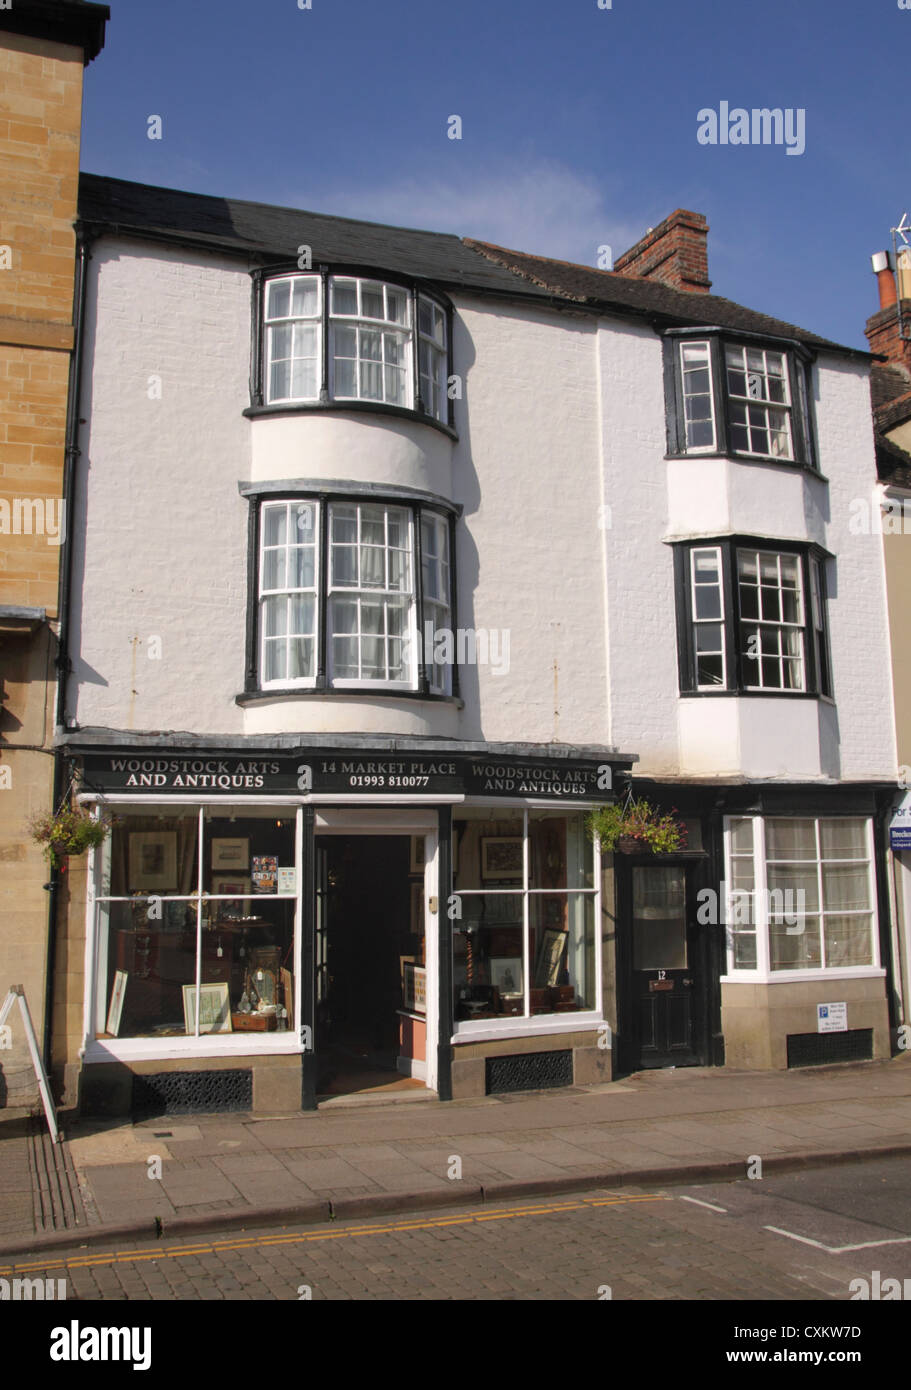 Woodstock Arts and Antiques shop Woodstock Oxfordshire Stock Photo